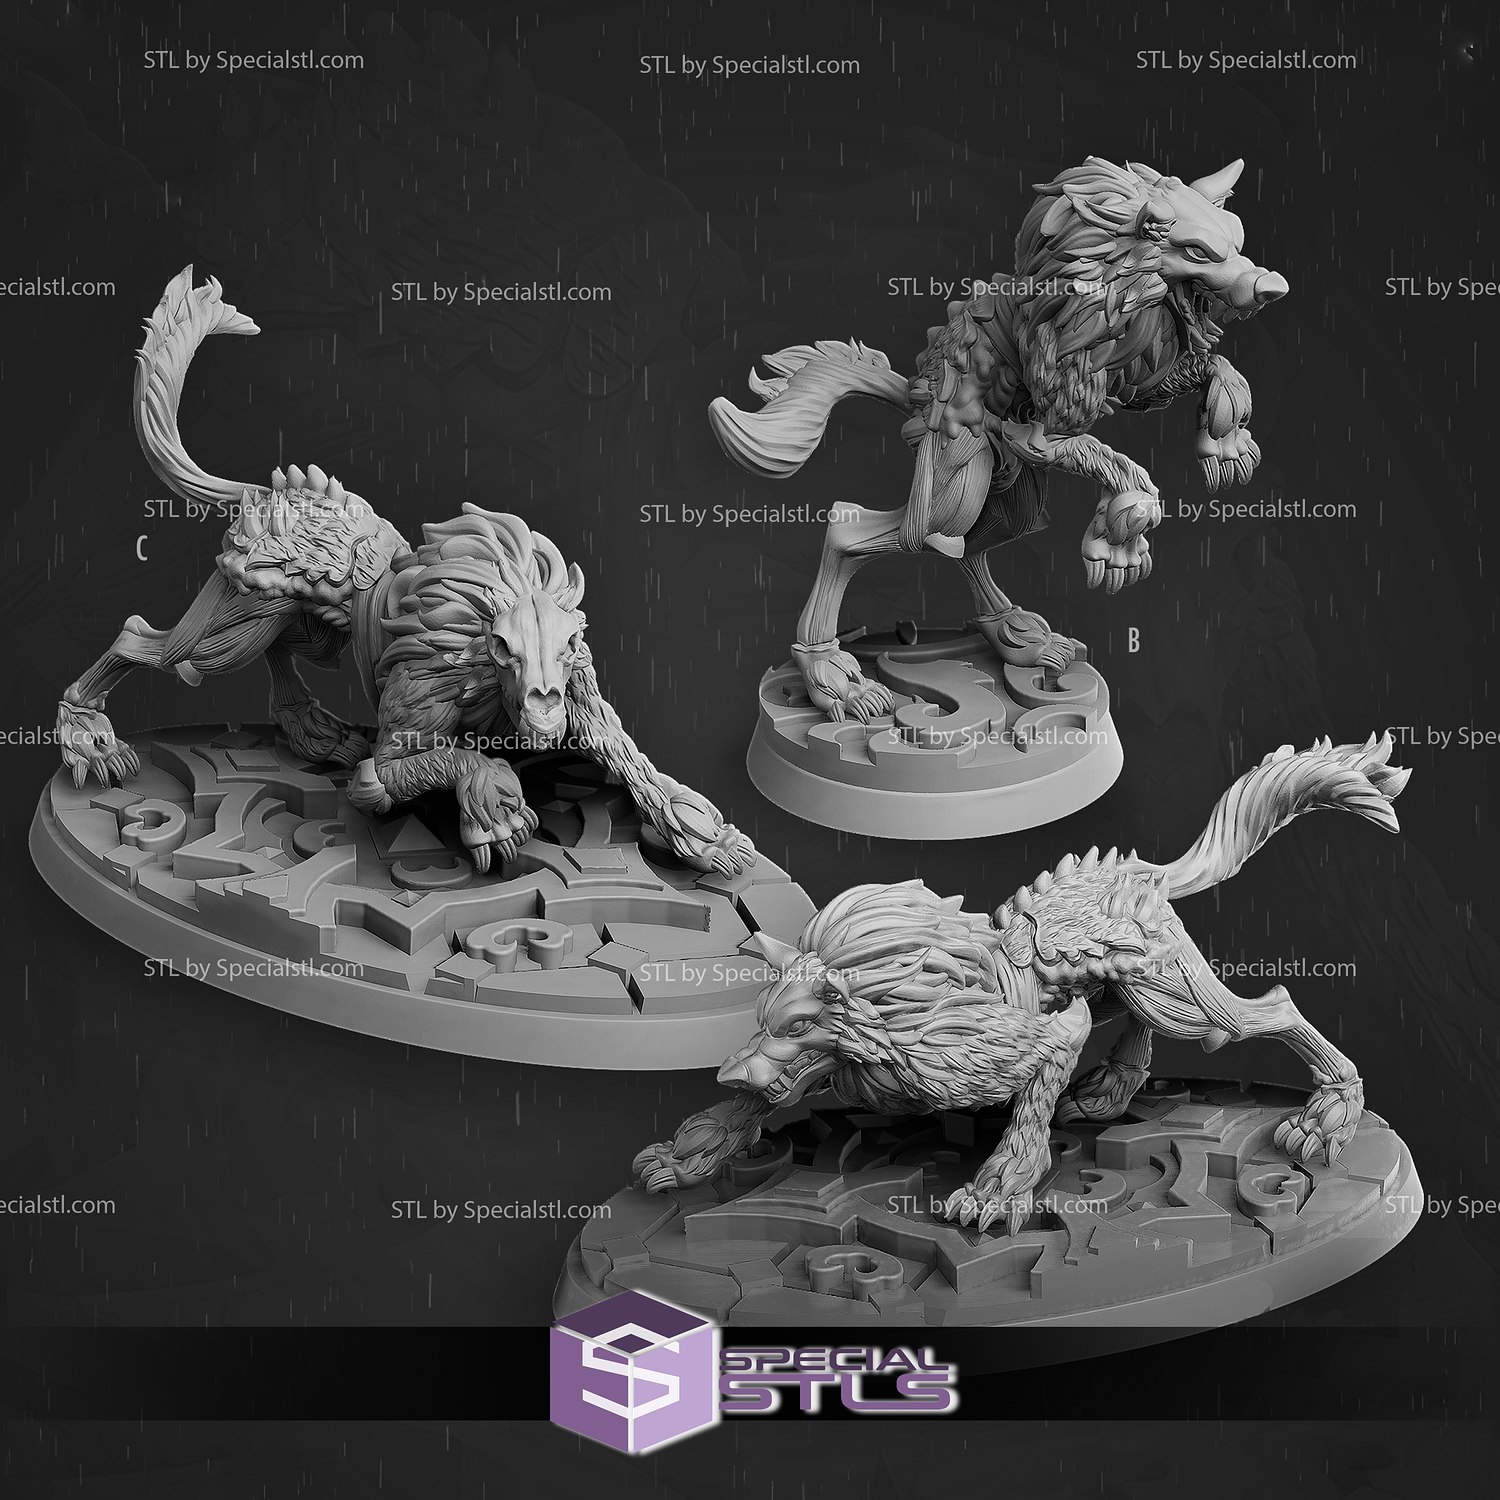 March 2021 Midnight Cast N Play Miniatures